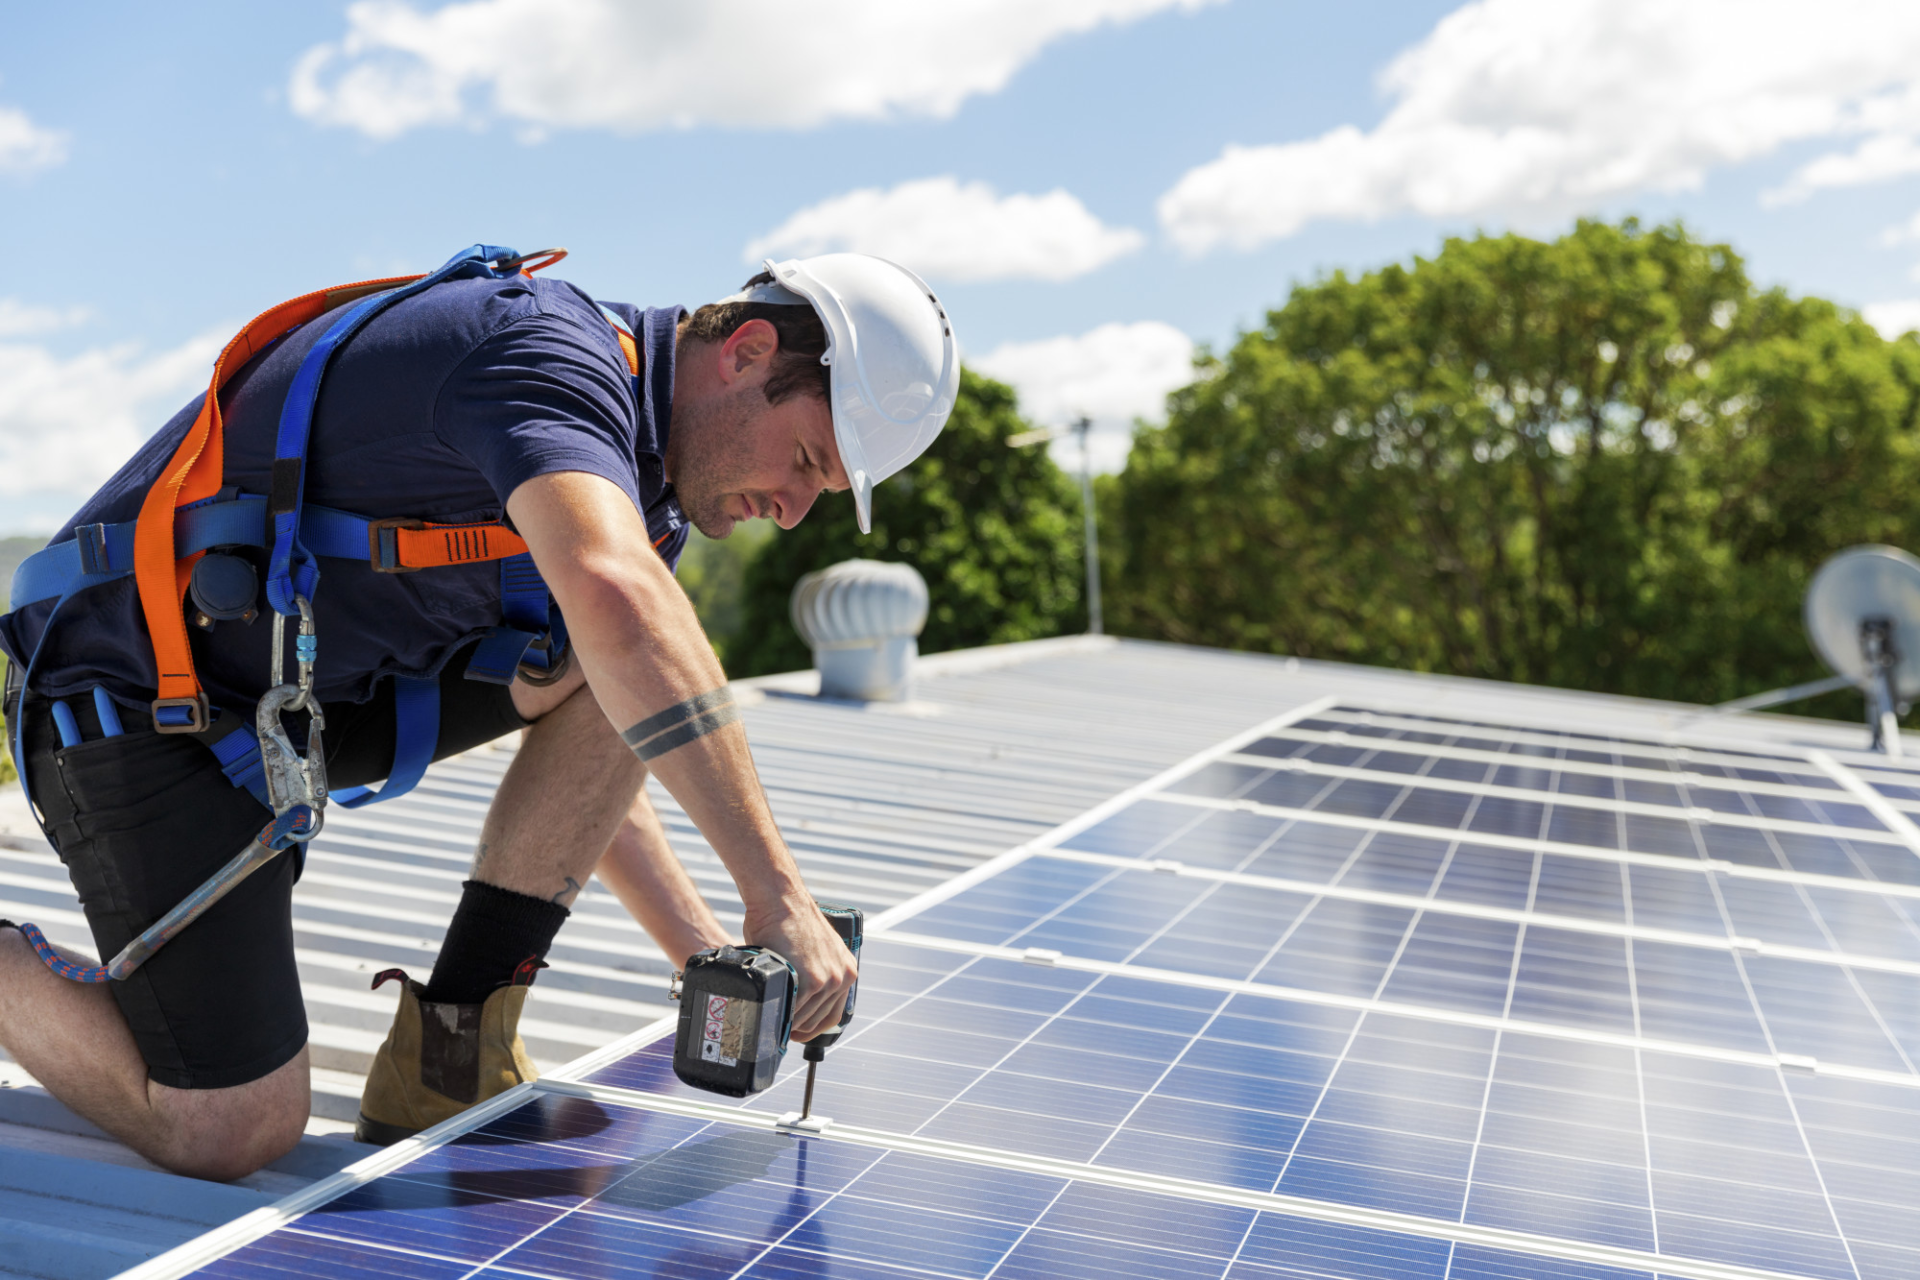 Should you get solar panels? A guide on how much they cost ...